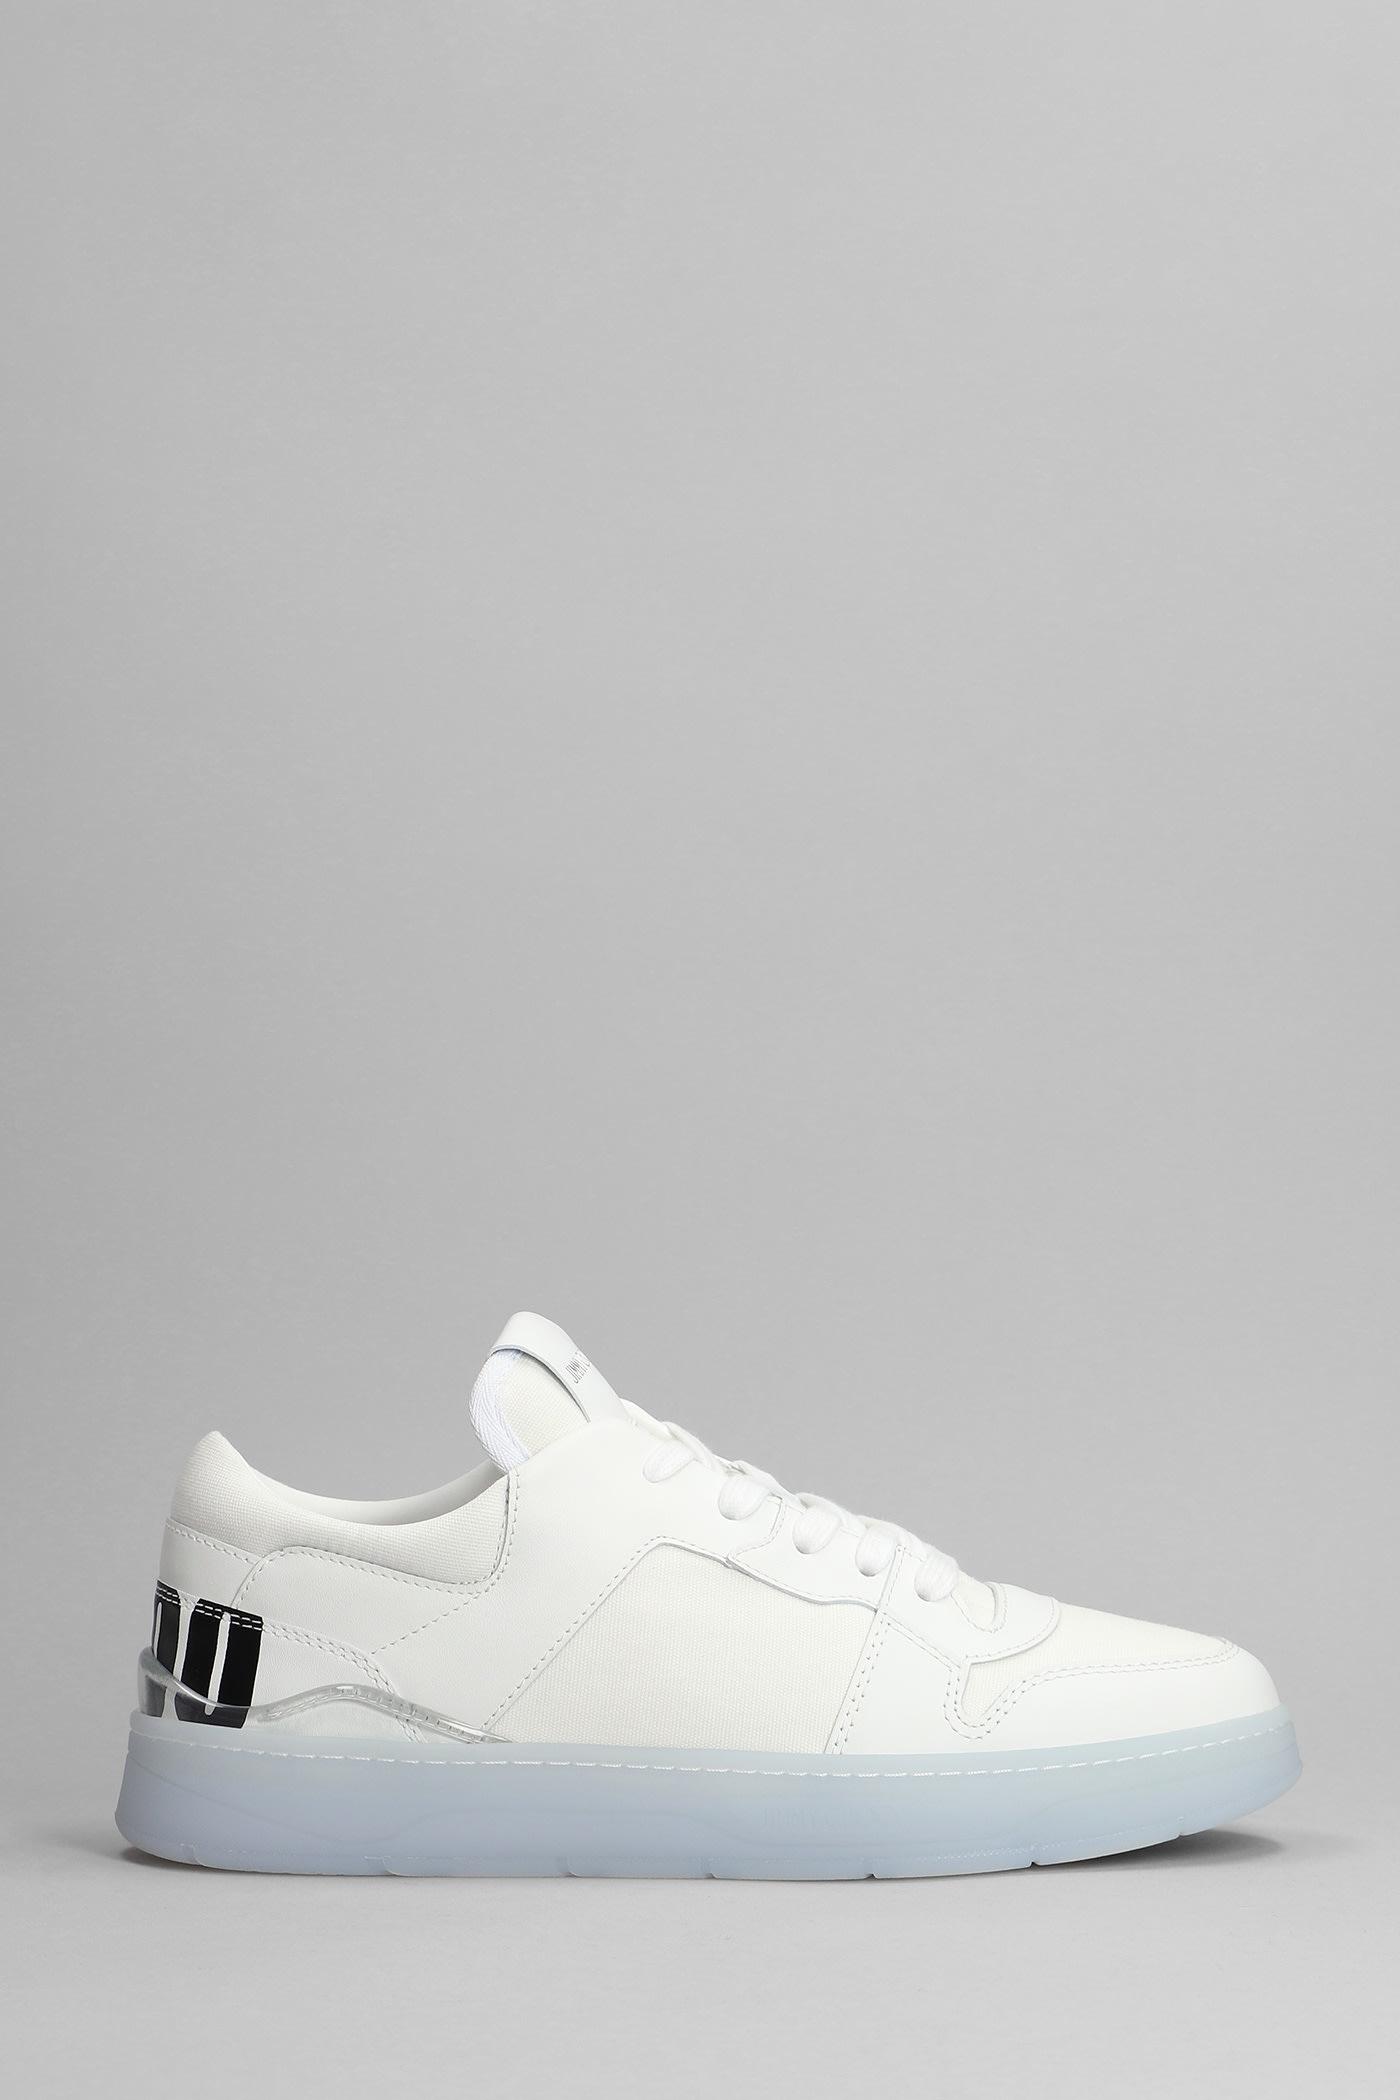 Jimmy Choo Florent Sneakers In White Cotton for Men | Lyst